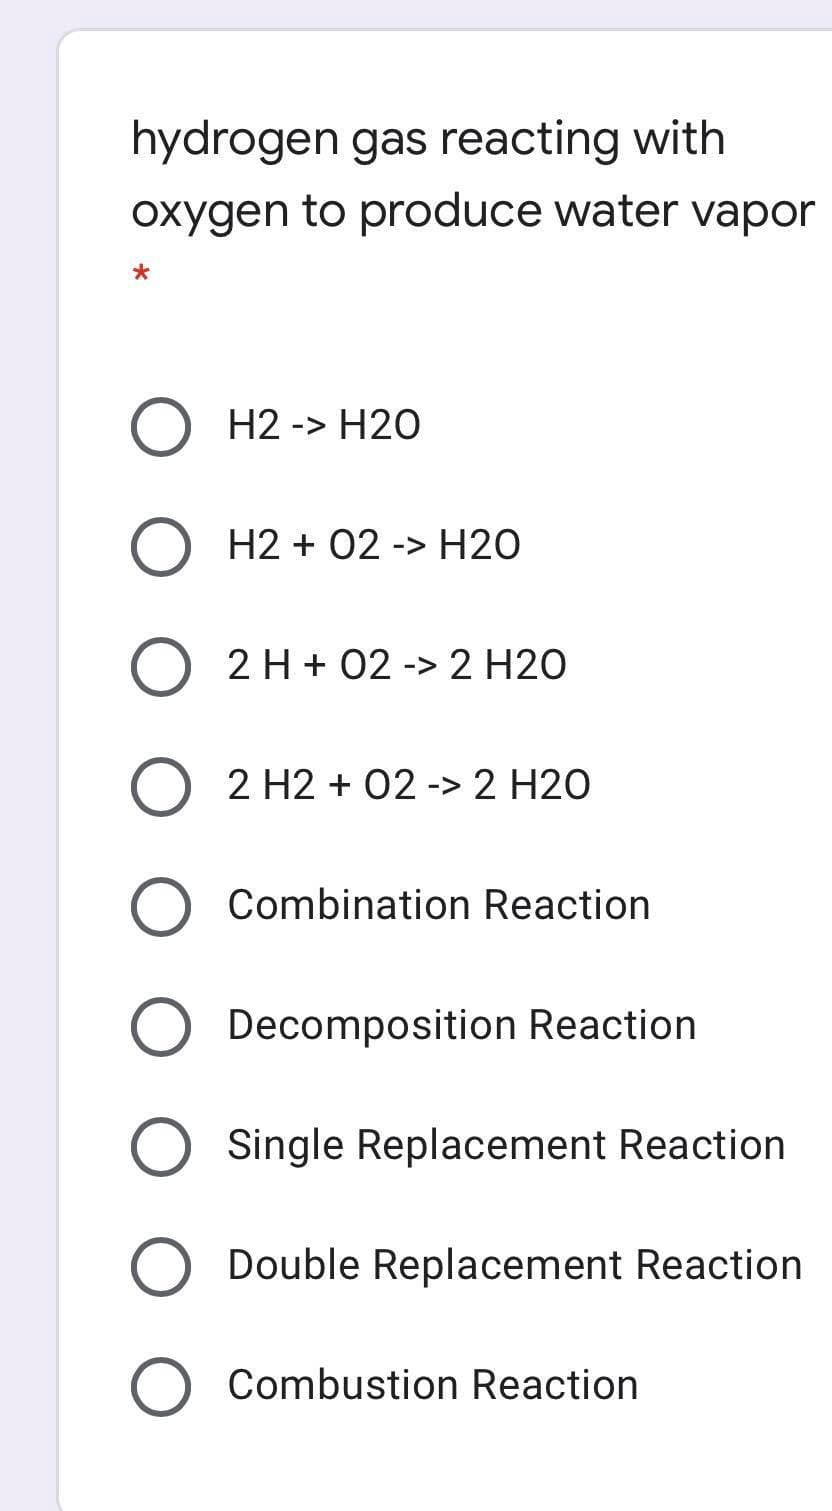 hydrogen gas reacting with
oxygen to produce water vapor
O H2 -> H20
H2 + 02 -> H20
O 2 H + 02 -> 2 H20
2 H2 + 02 -> 2 H20
Combination Reaction
Decomposition Reaction
Single Replacement Reaction
Double Replacement Reaction
Combustion Reaction
